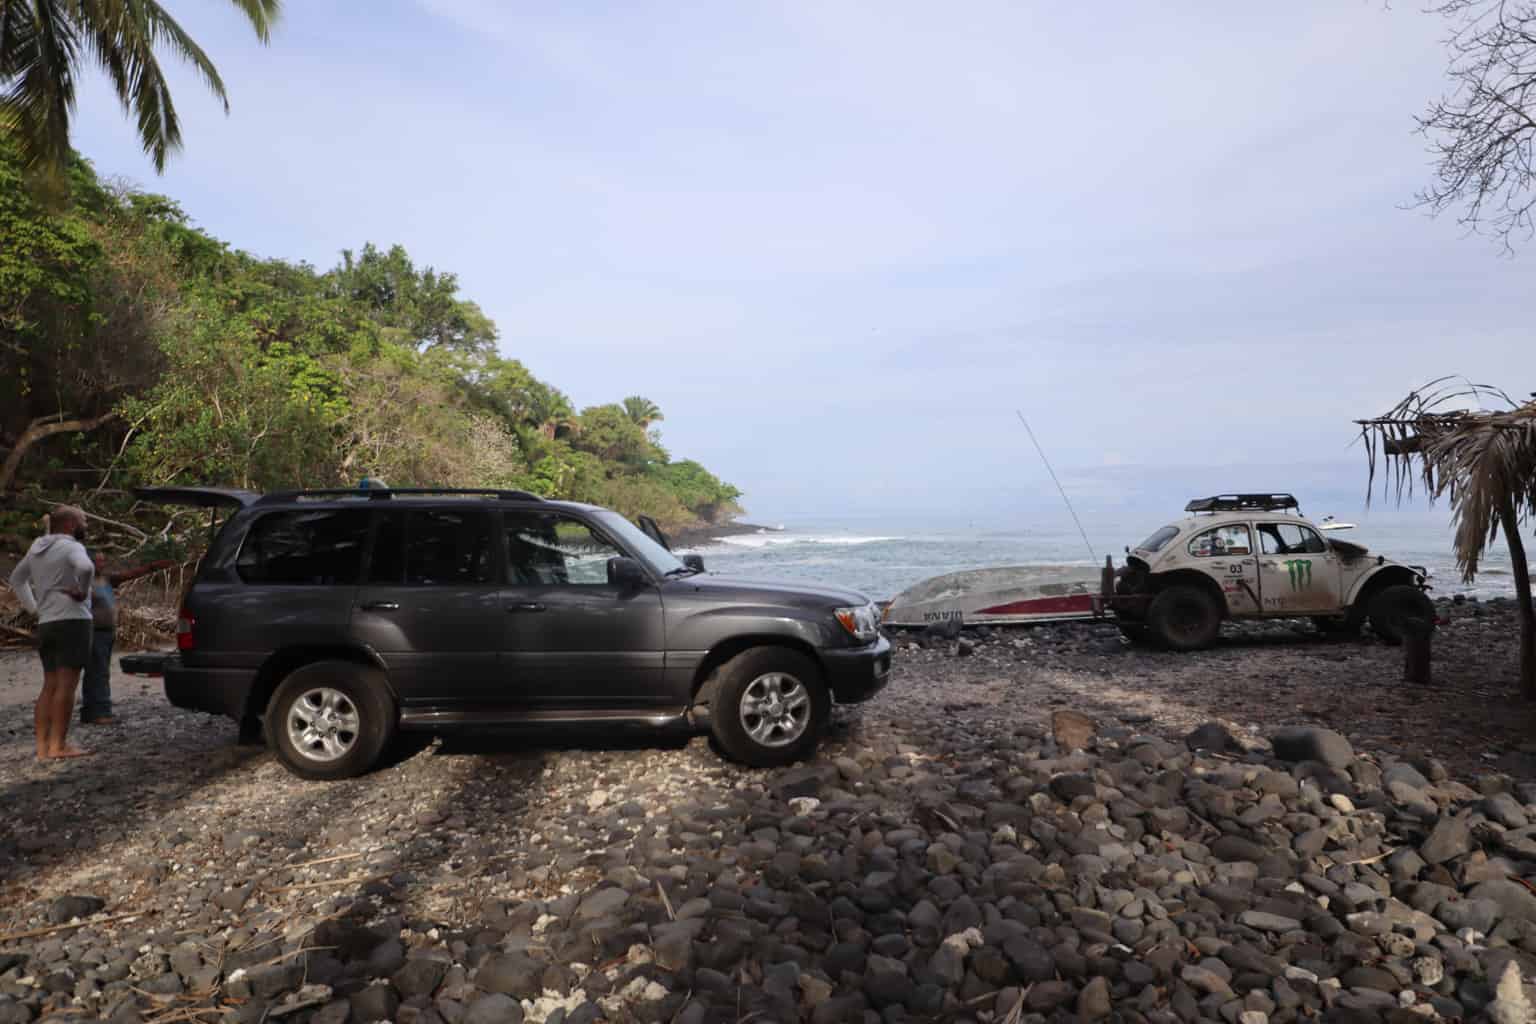 Toyota Land Cruiser on the beach in Mexico